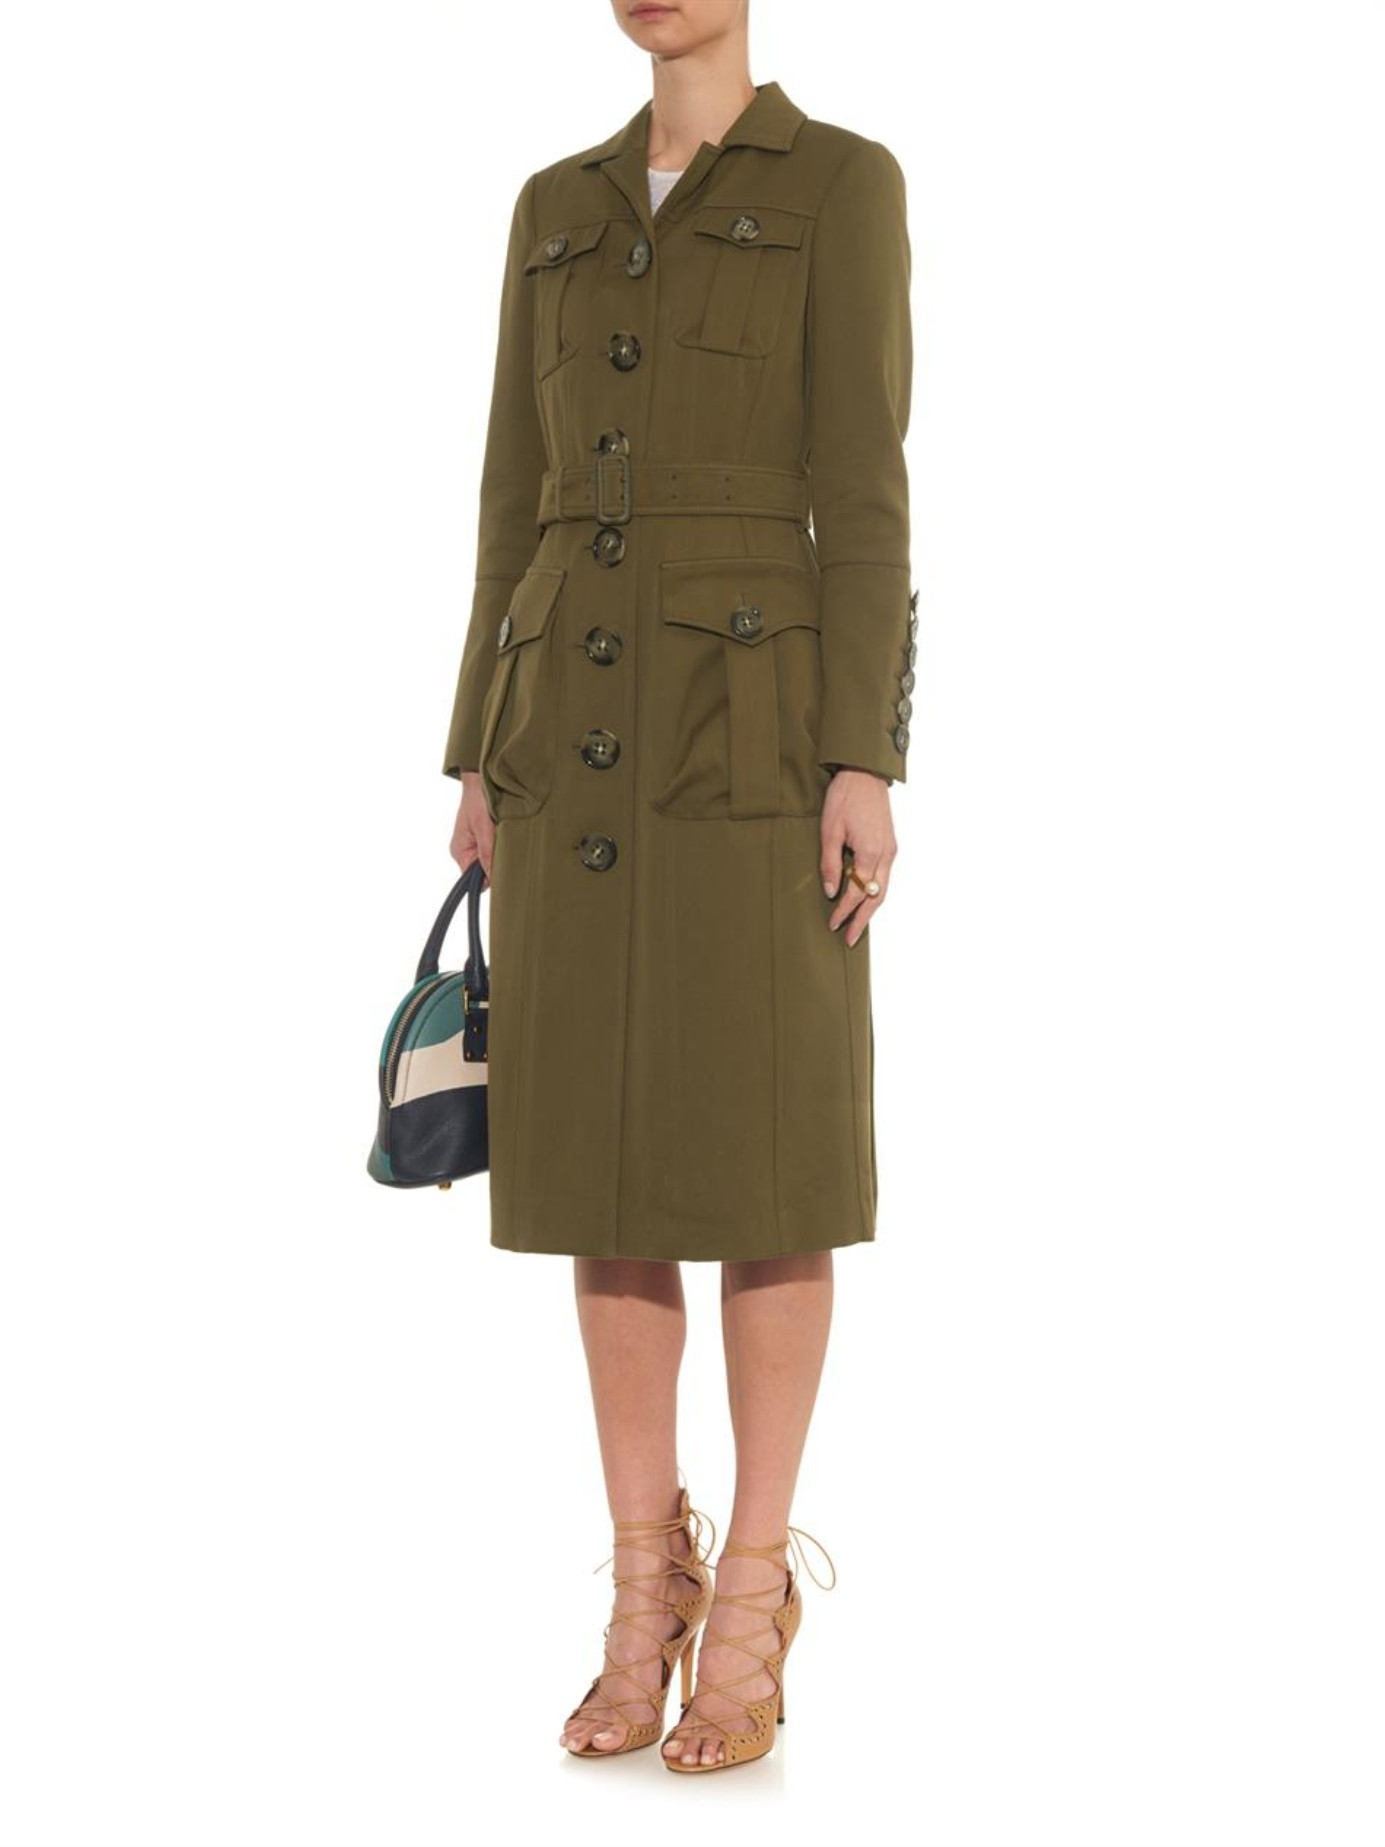 Burberry prorsum Cotton-Twill Trench Coat in Natural | Lyst